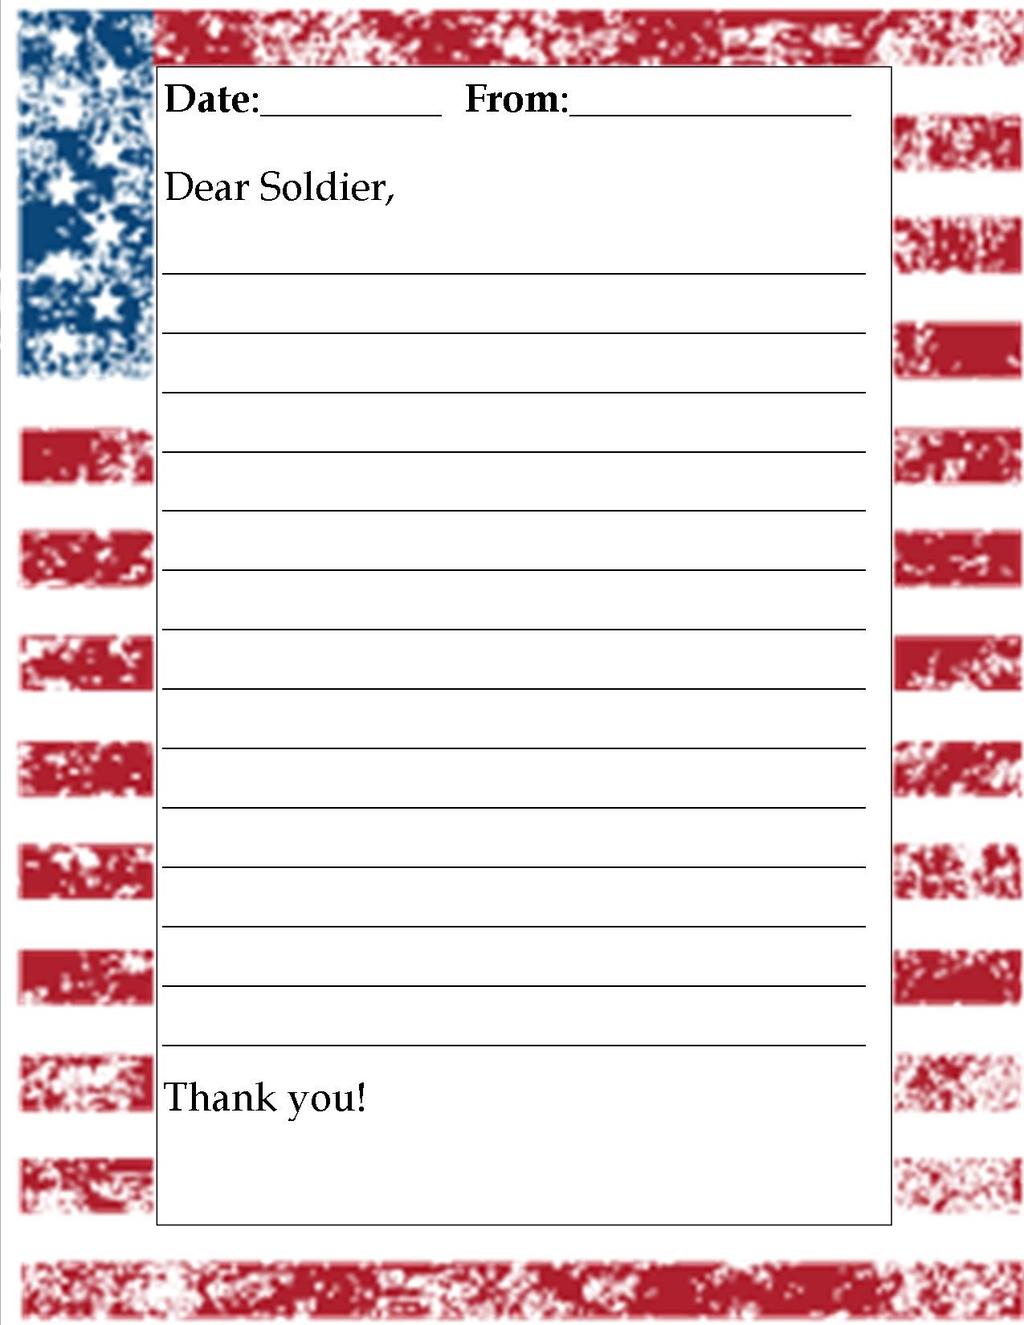 November is Patriotism month and, to celebrate this, we will be collecting letters for the